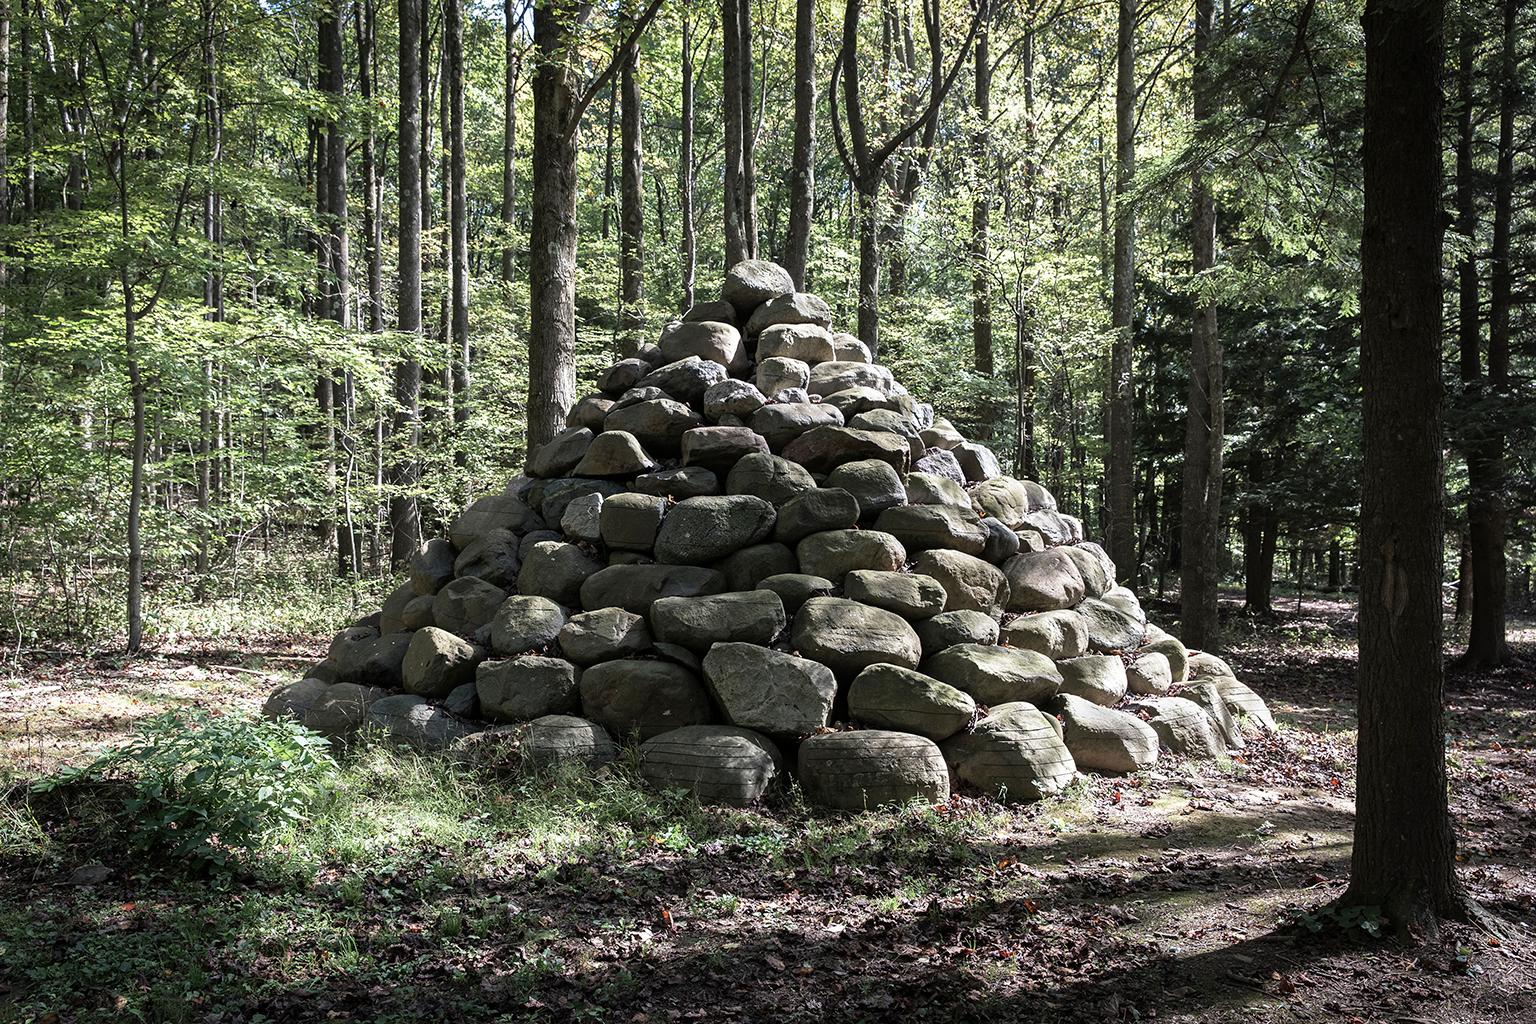  Cosmo Condina Landscape Photograph - Stone Cairn Sculpture in Forest,  USA, 2016